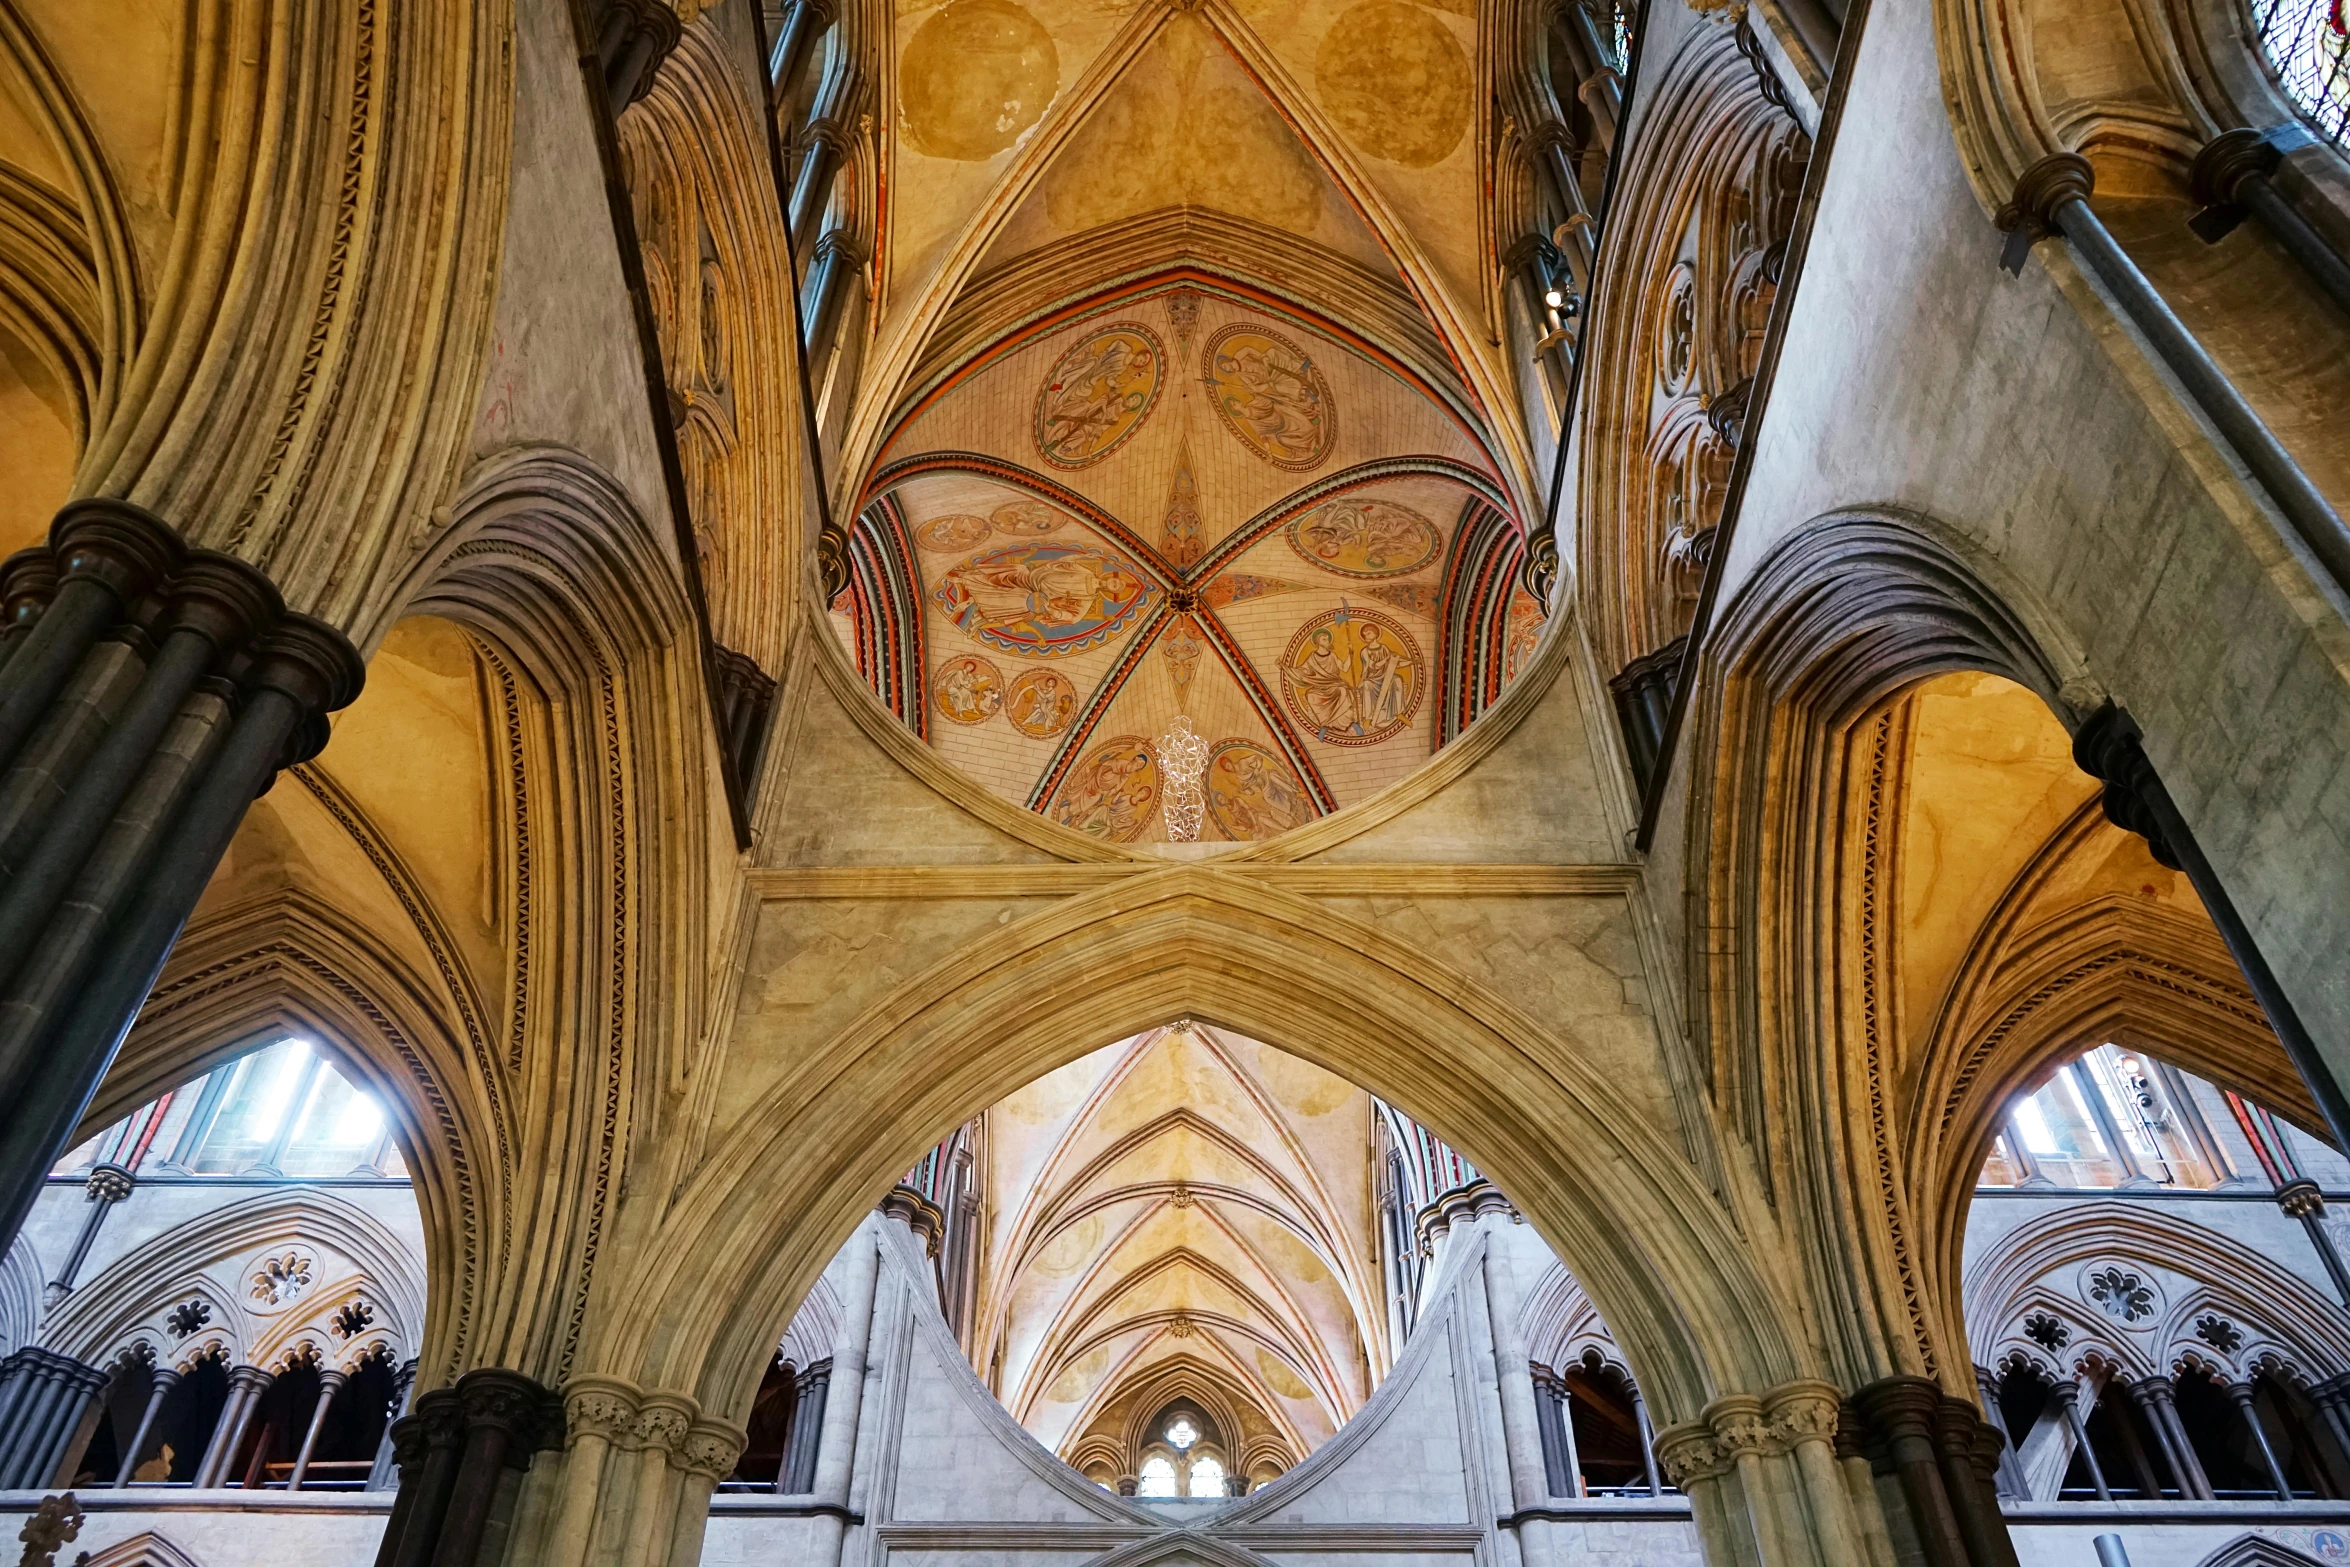 an old cathedral has a vaulted ceiling and a large stained glass window